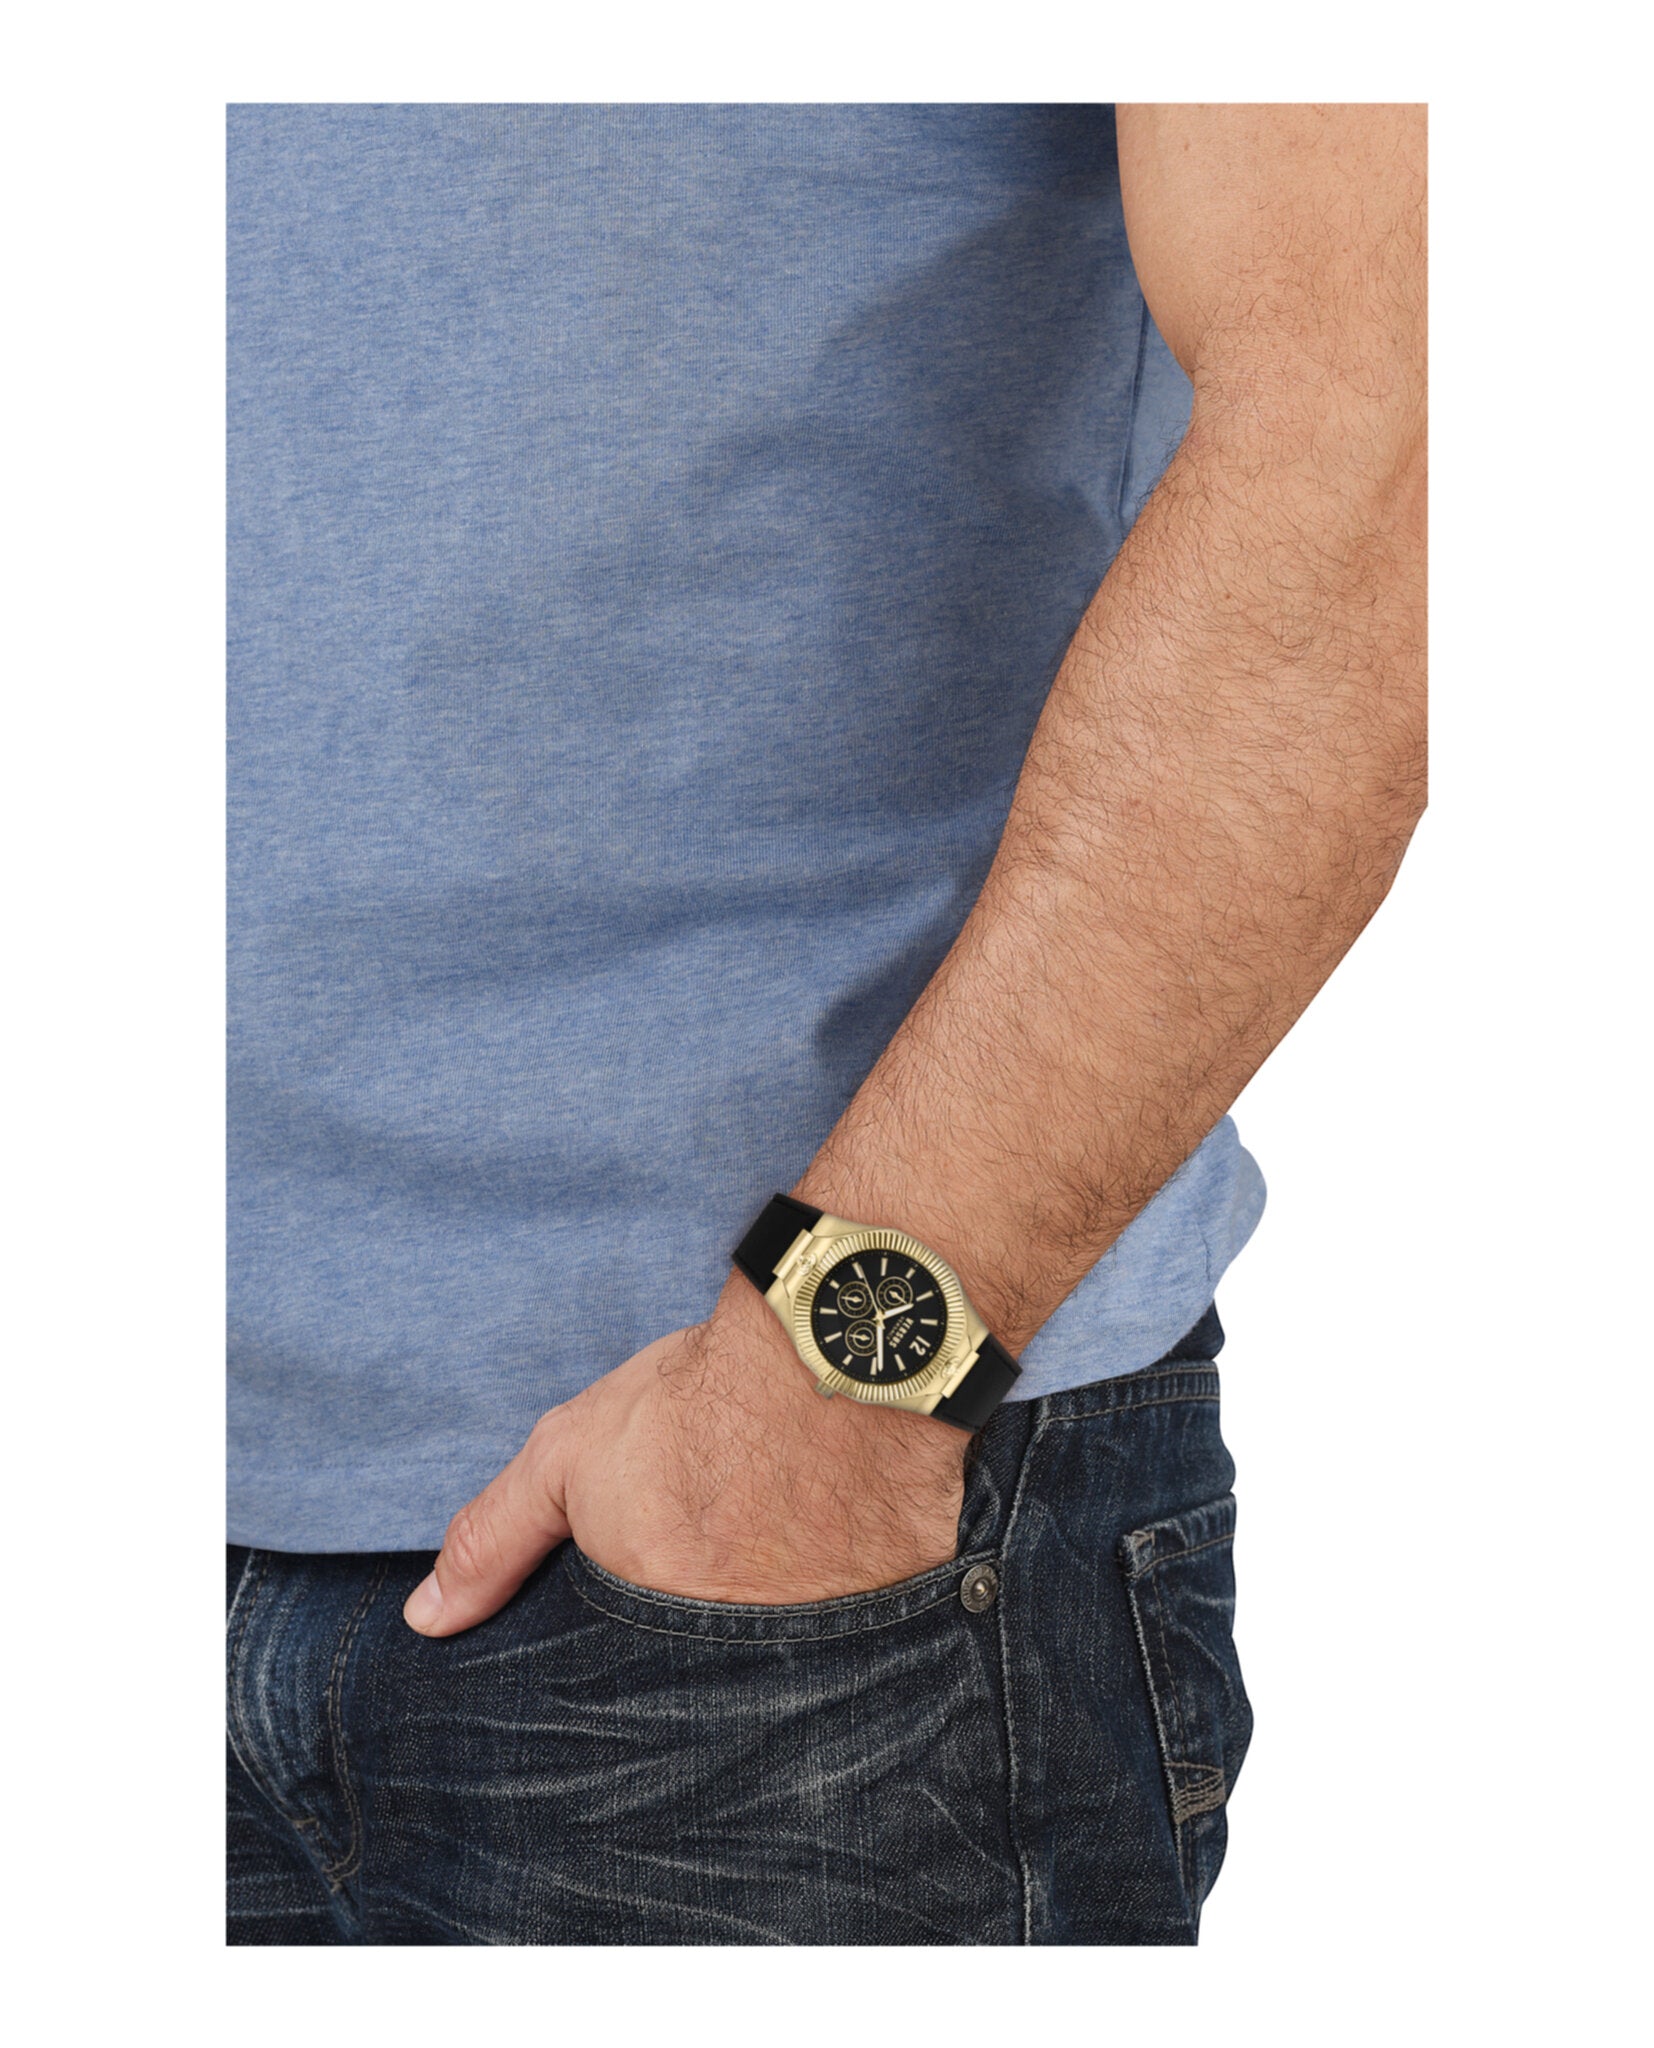 Echo Park Multifunction Leather Watch